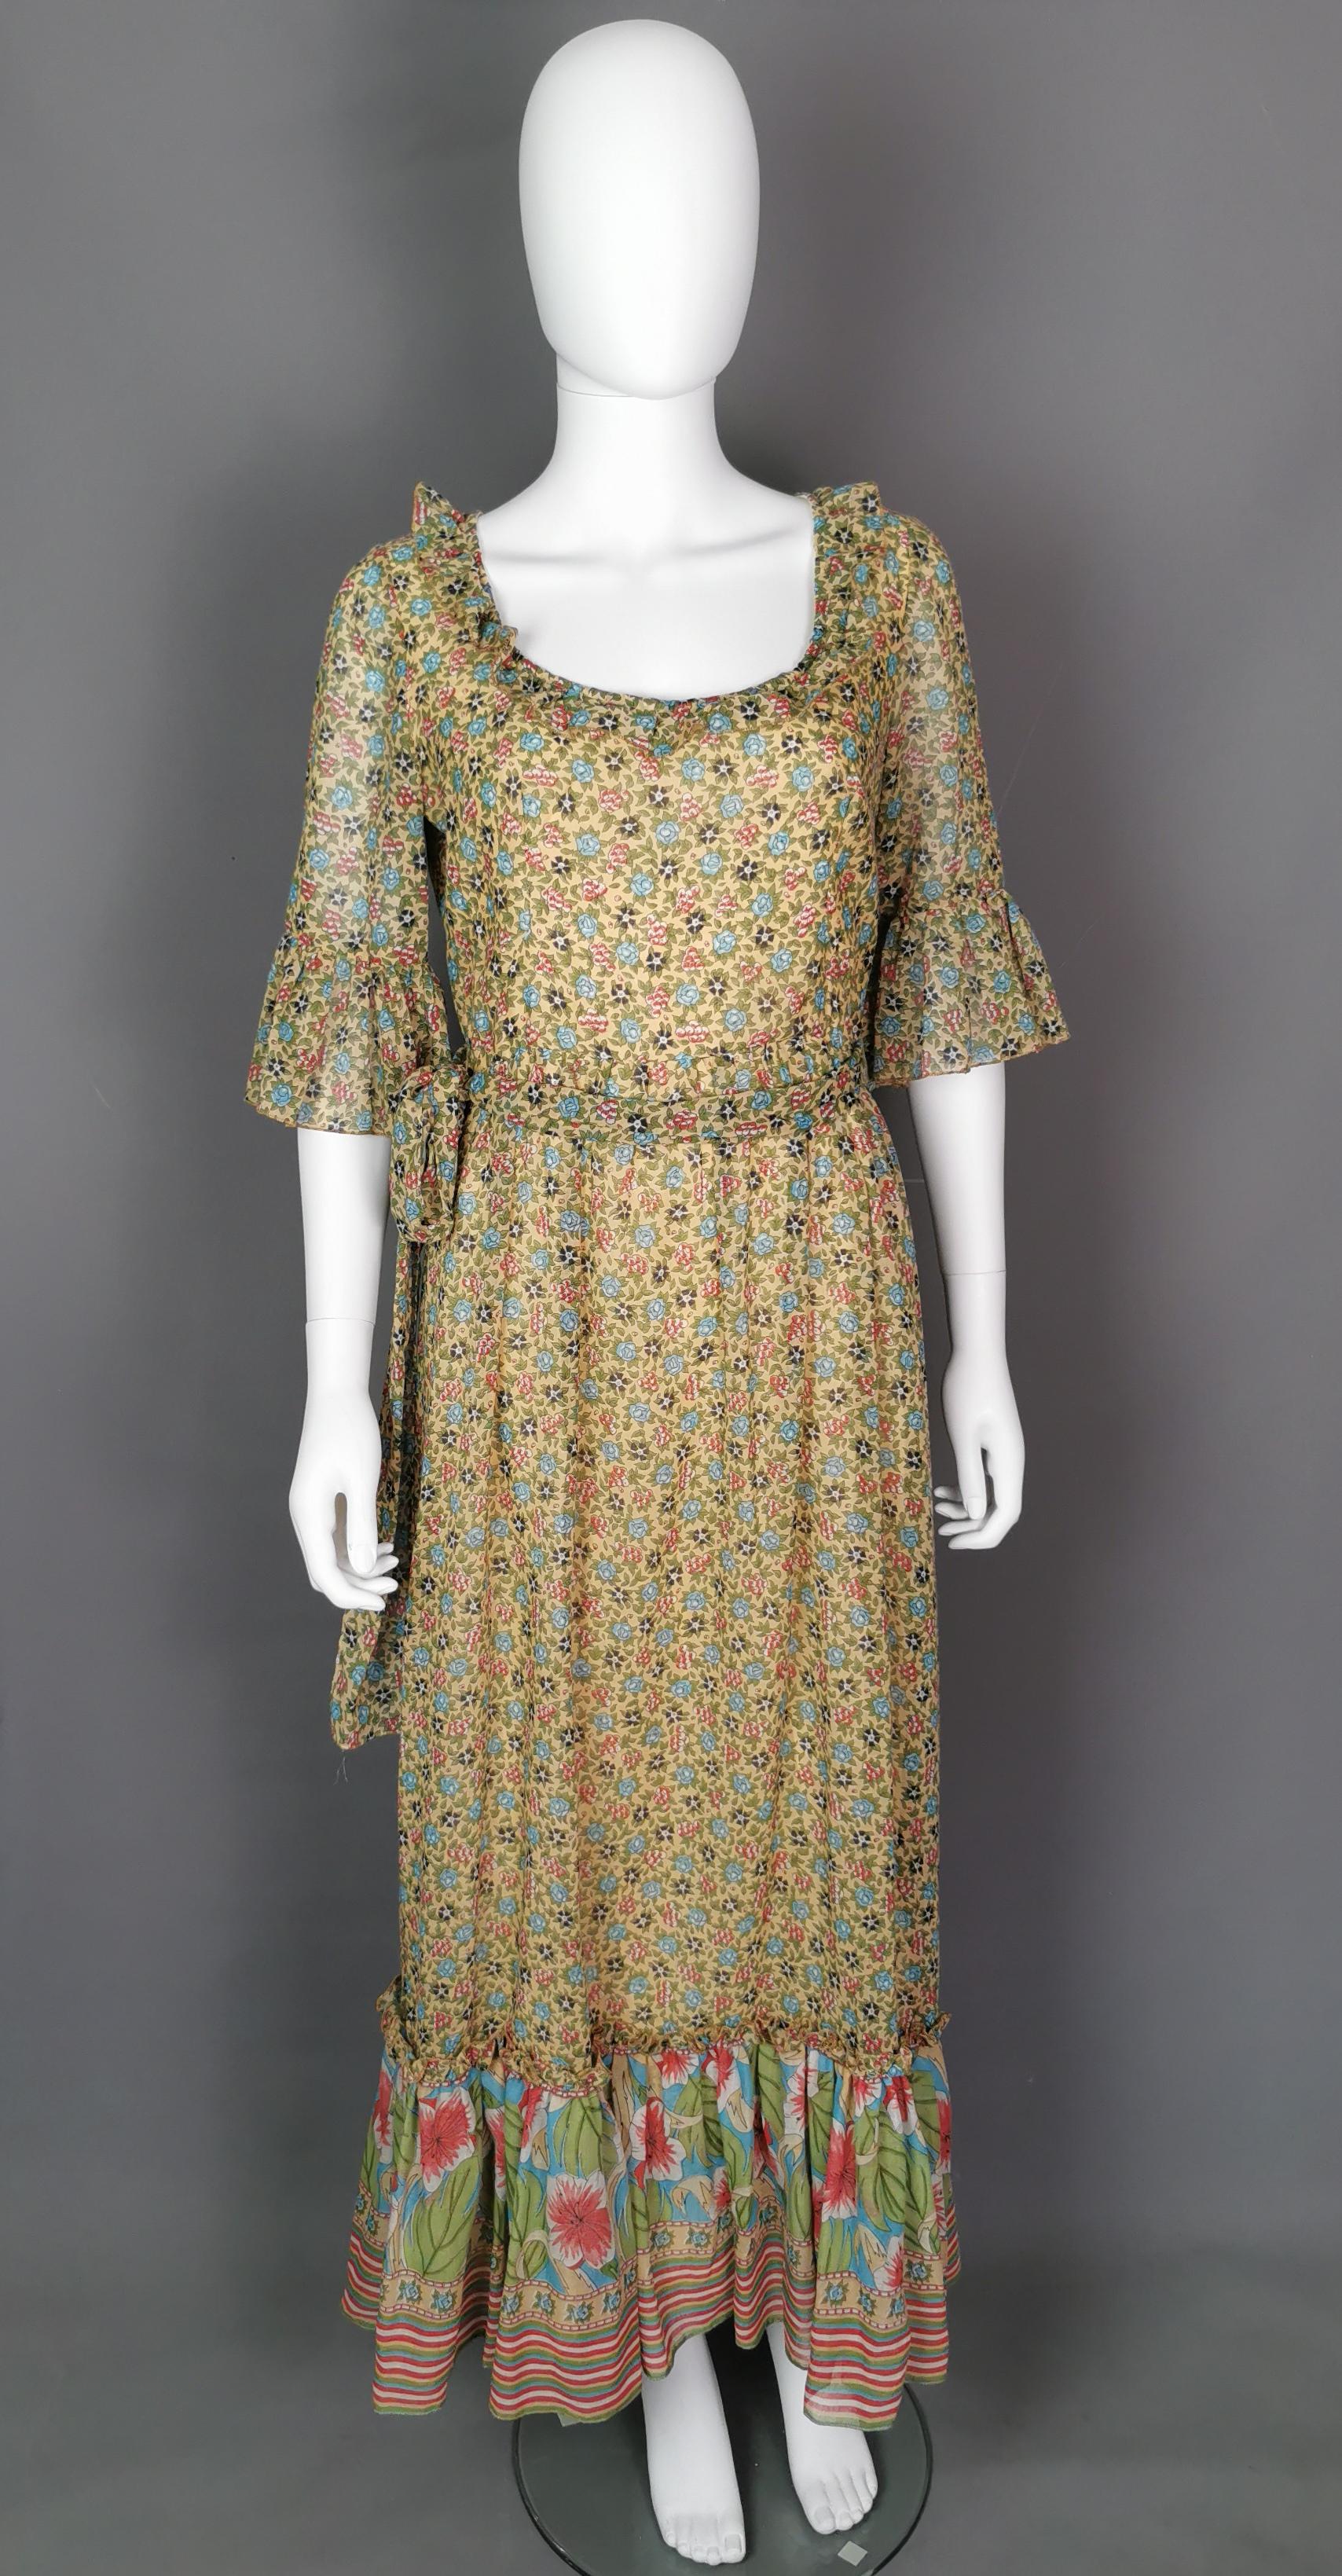 A beautiful vintage c1970s floral maxi dress.

The dress is made from a lovely soft, slightly sheer fine cotton printed with a floral design, almost a ditsy print with a contrasting tropical flower print to the frilly hem.

It has half length frilly